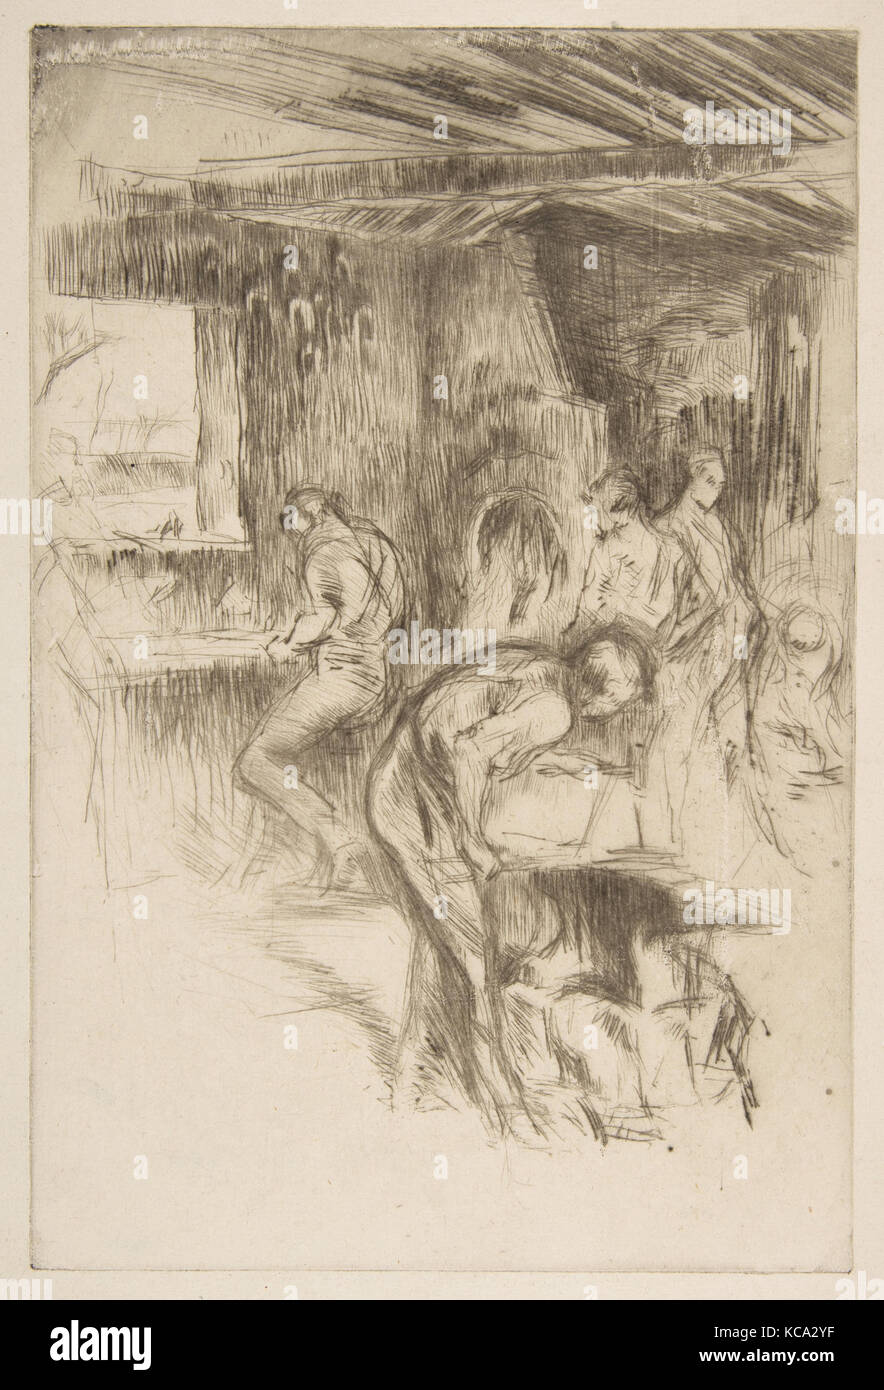 The Little Forge (The Little Forge, Liverpool), James McNeill Whistler, 1875 Stock Photo